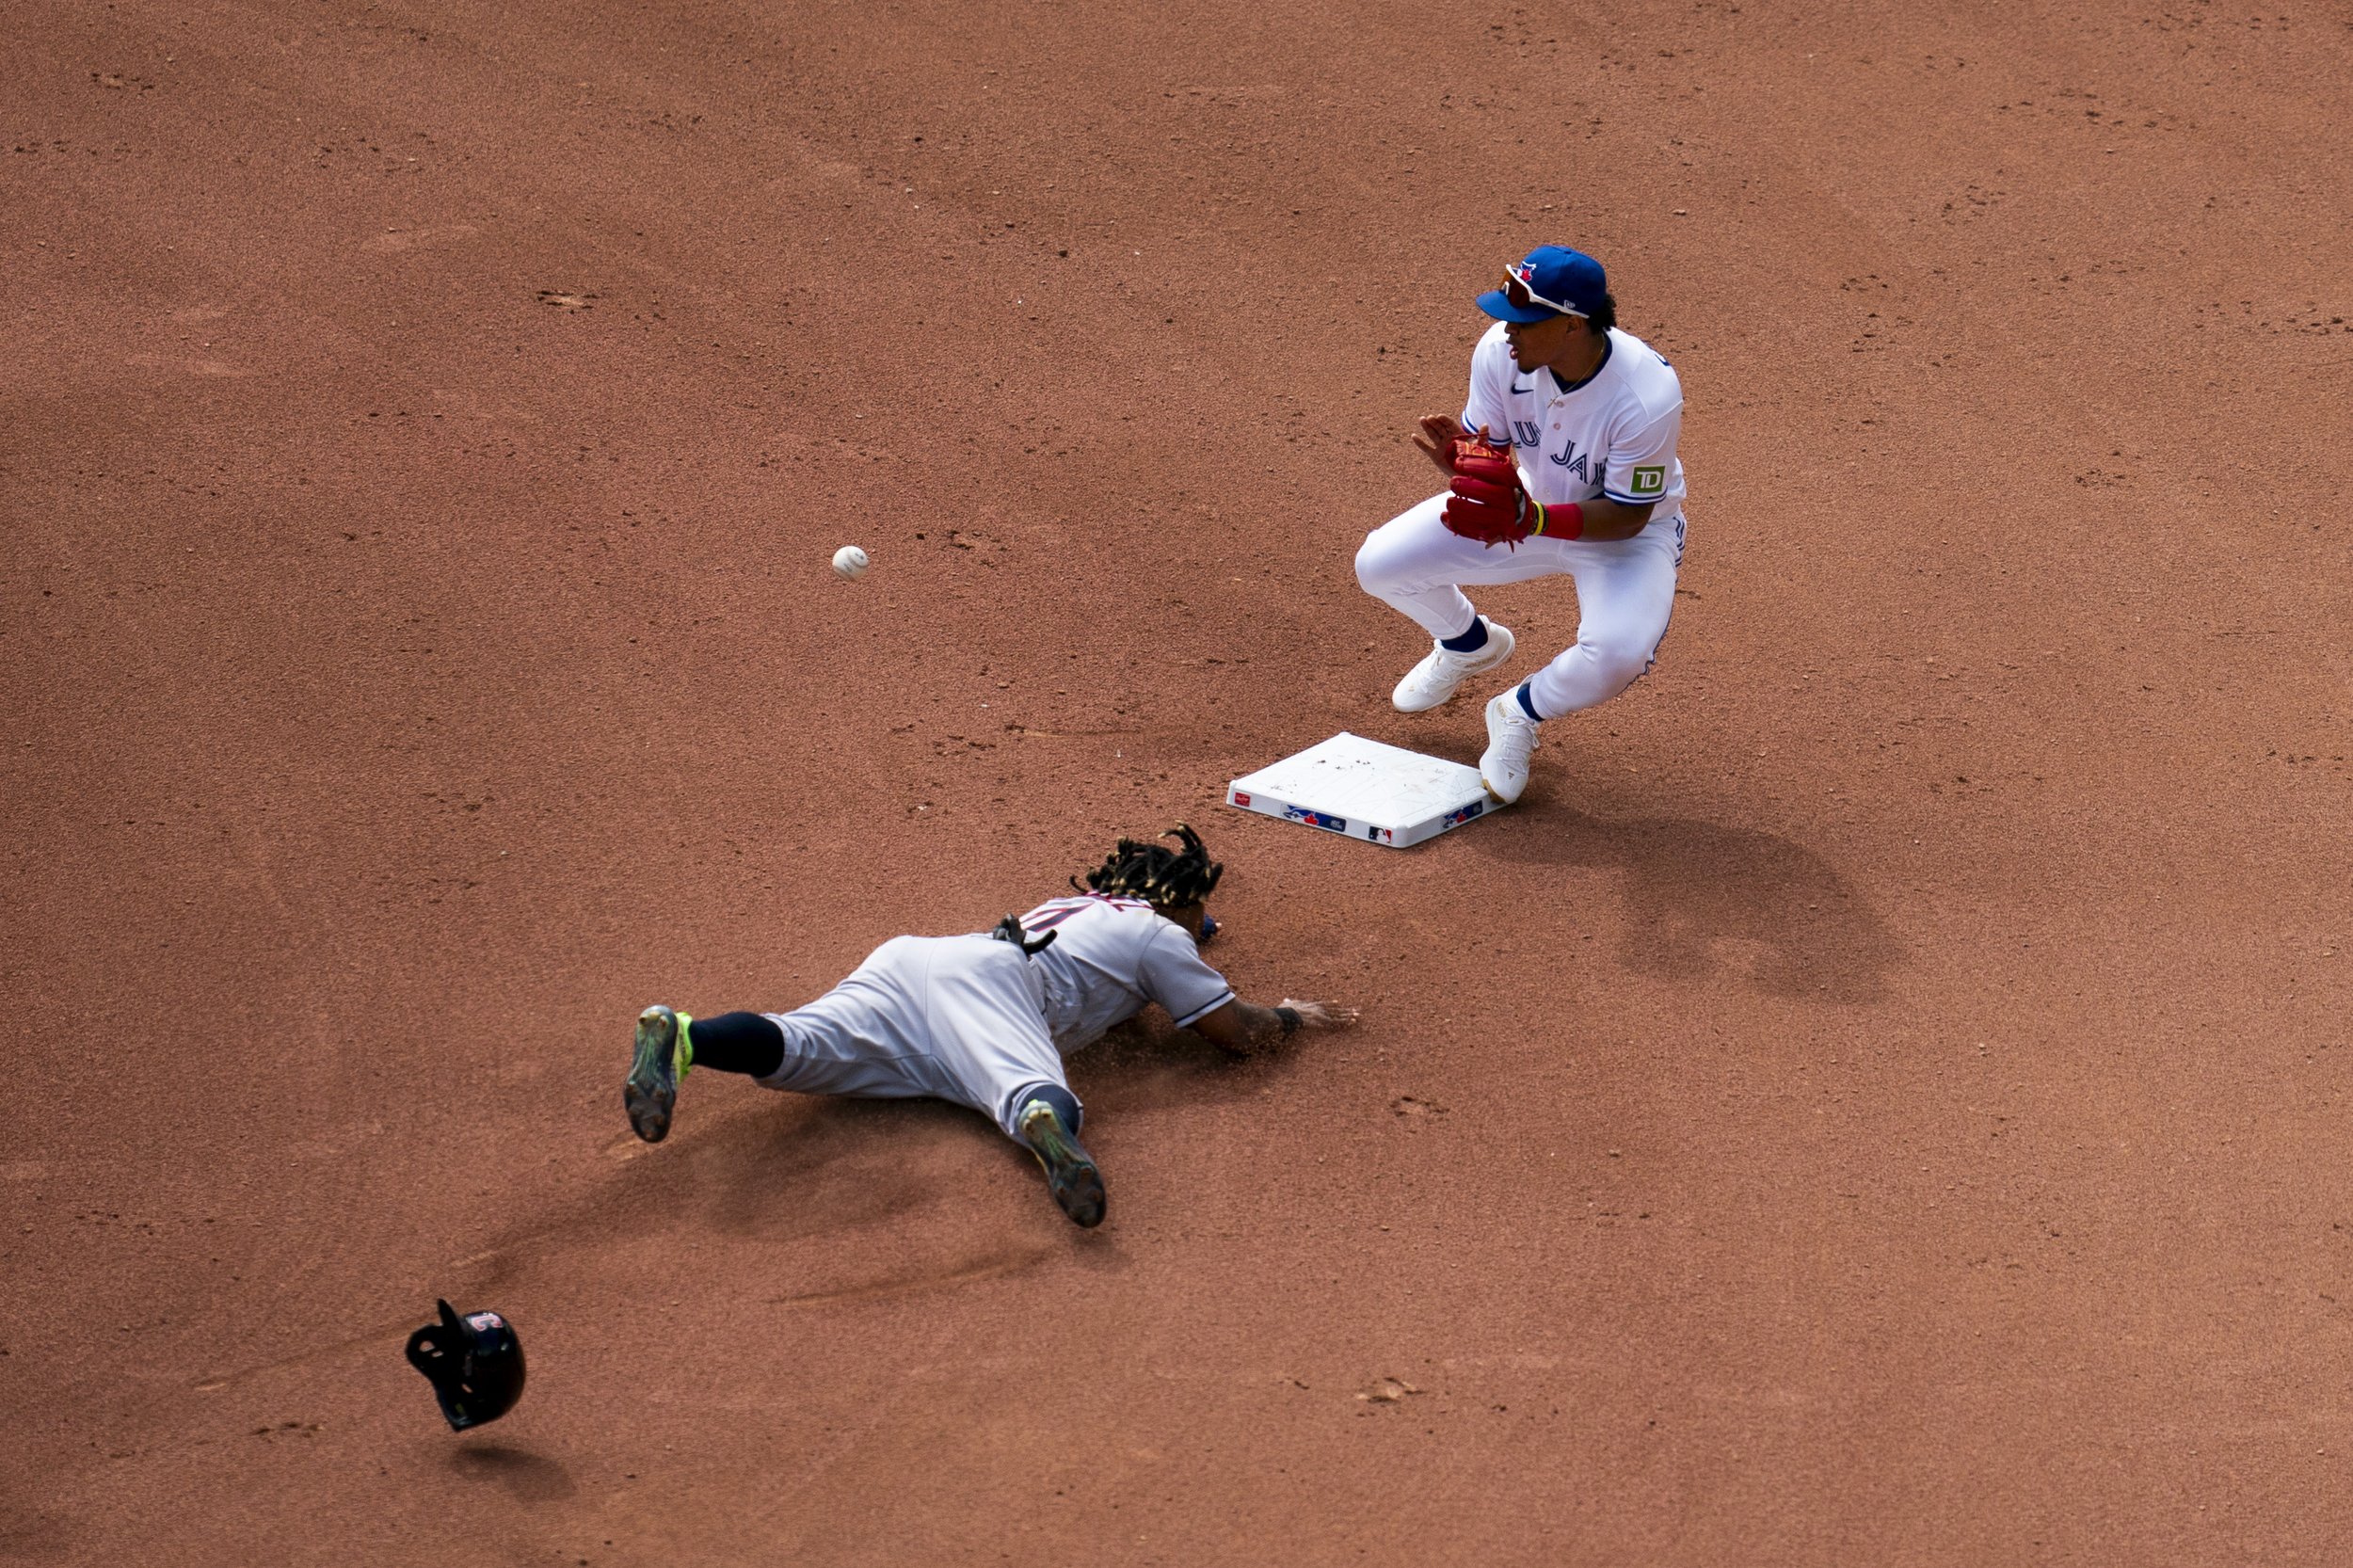  Cleveland Guardians third baseman Jose Ramirez (11) slides into second base as Toronto Blue Jays second baseman Santiago Espinal (5) attempts a tag from a pitch by Toronto Blue Jays relief pitcher Genesis Cabrera (92) during seventh inning American 